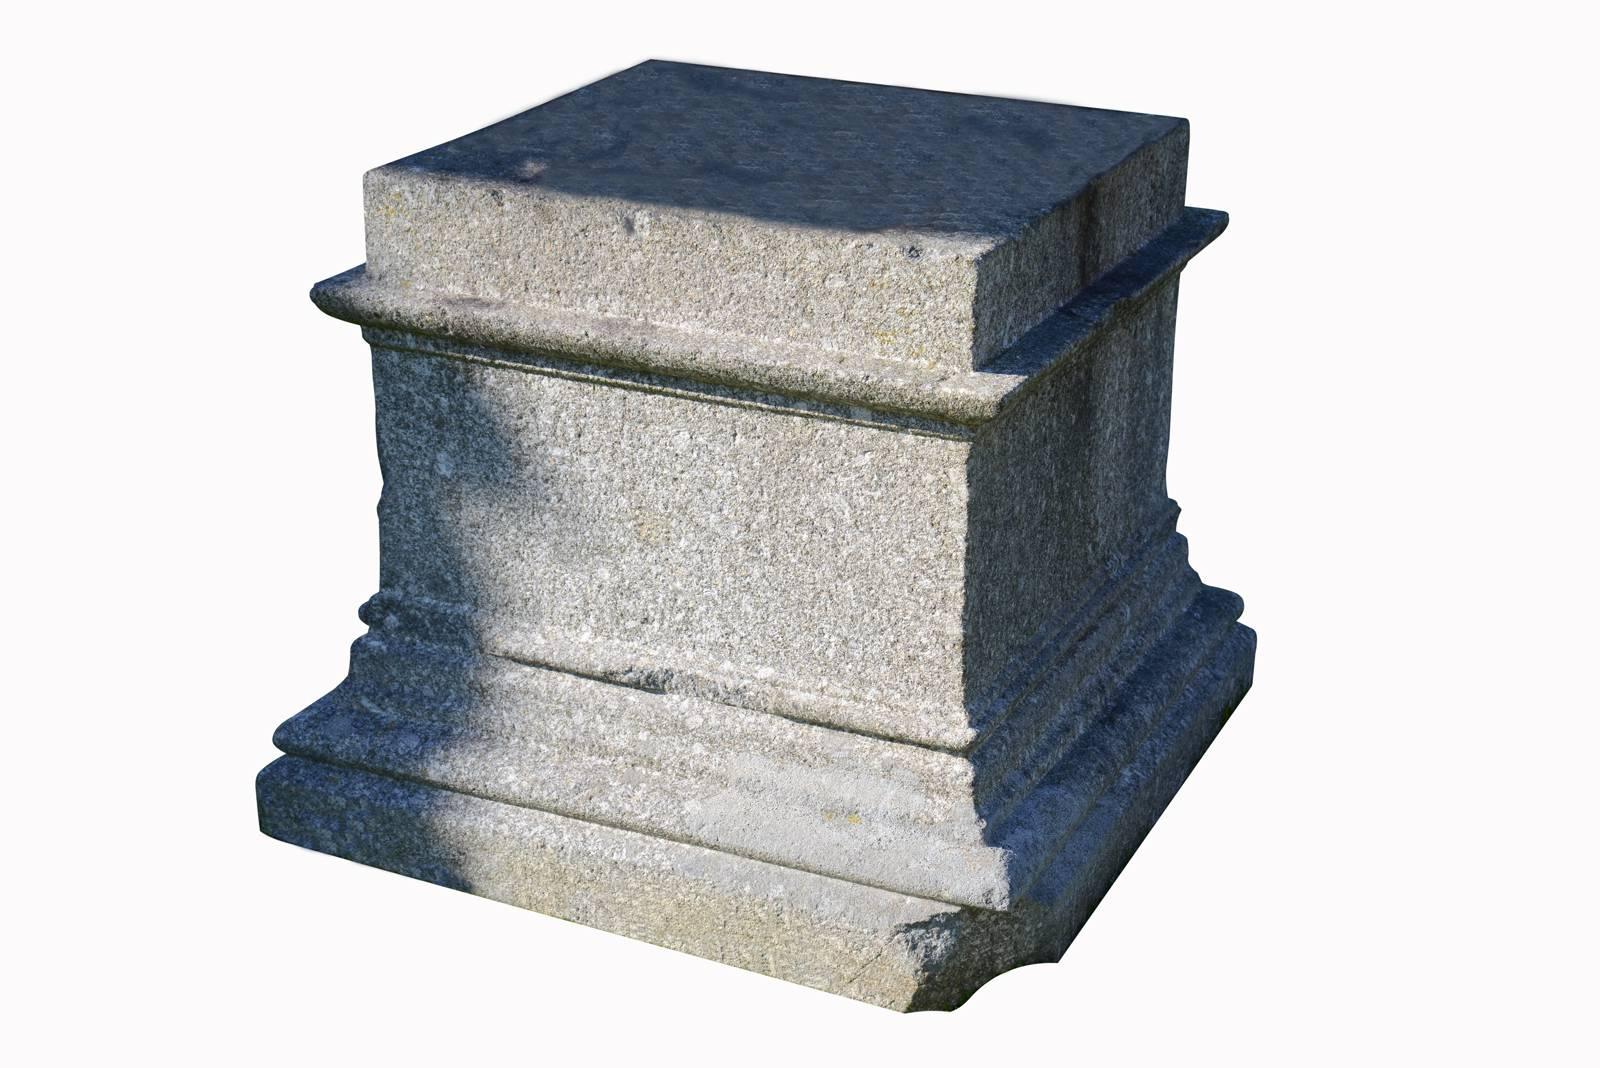 Dated from the 19th century, stone pedestal. It is decorated with moldings in the upper part and having an ogee on the lower part. Small losses.

The part for supporting an object: 23.6 x 23.6 in.